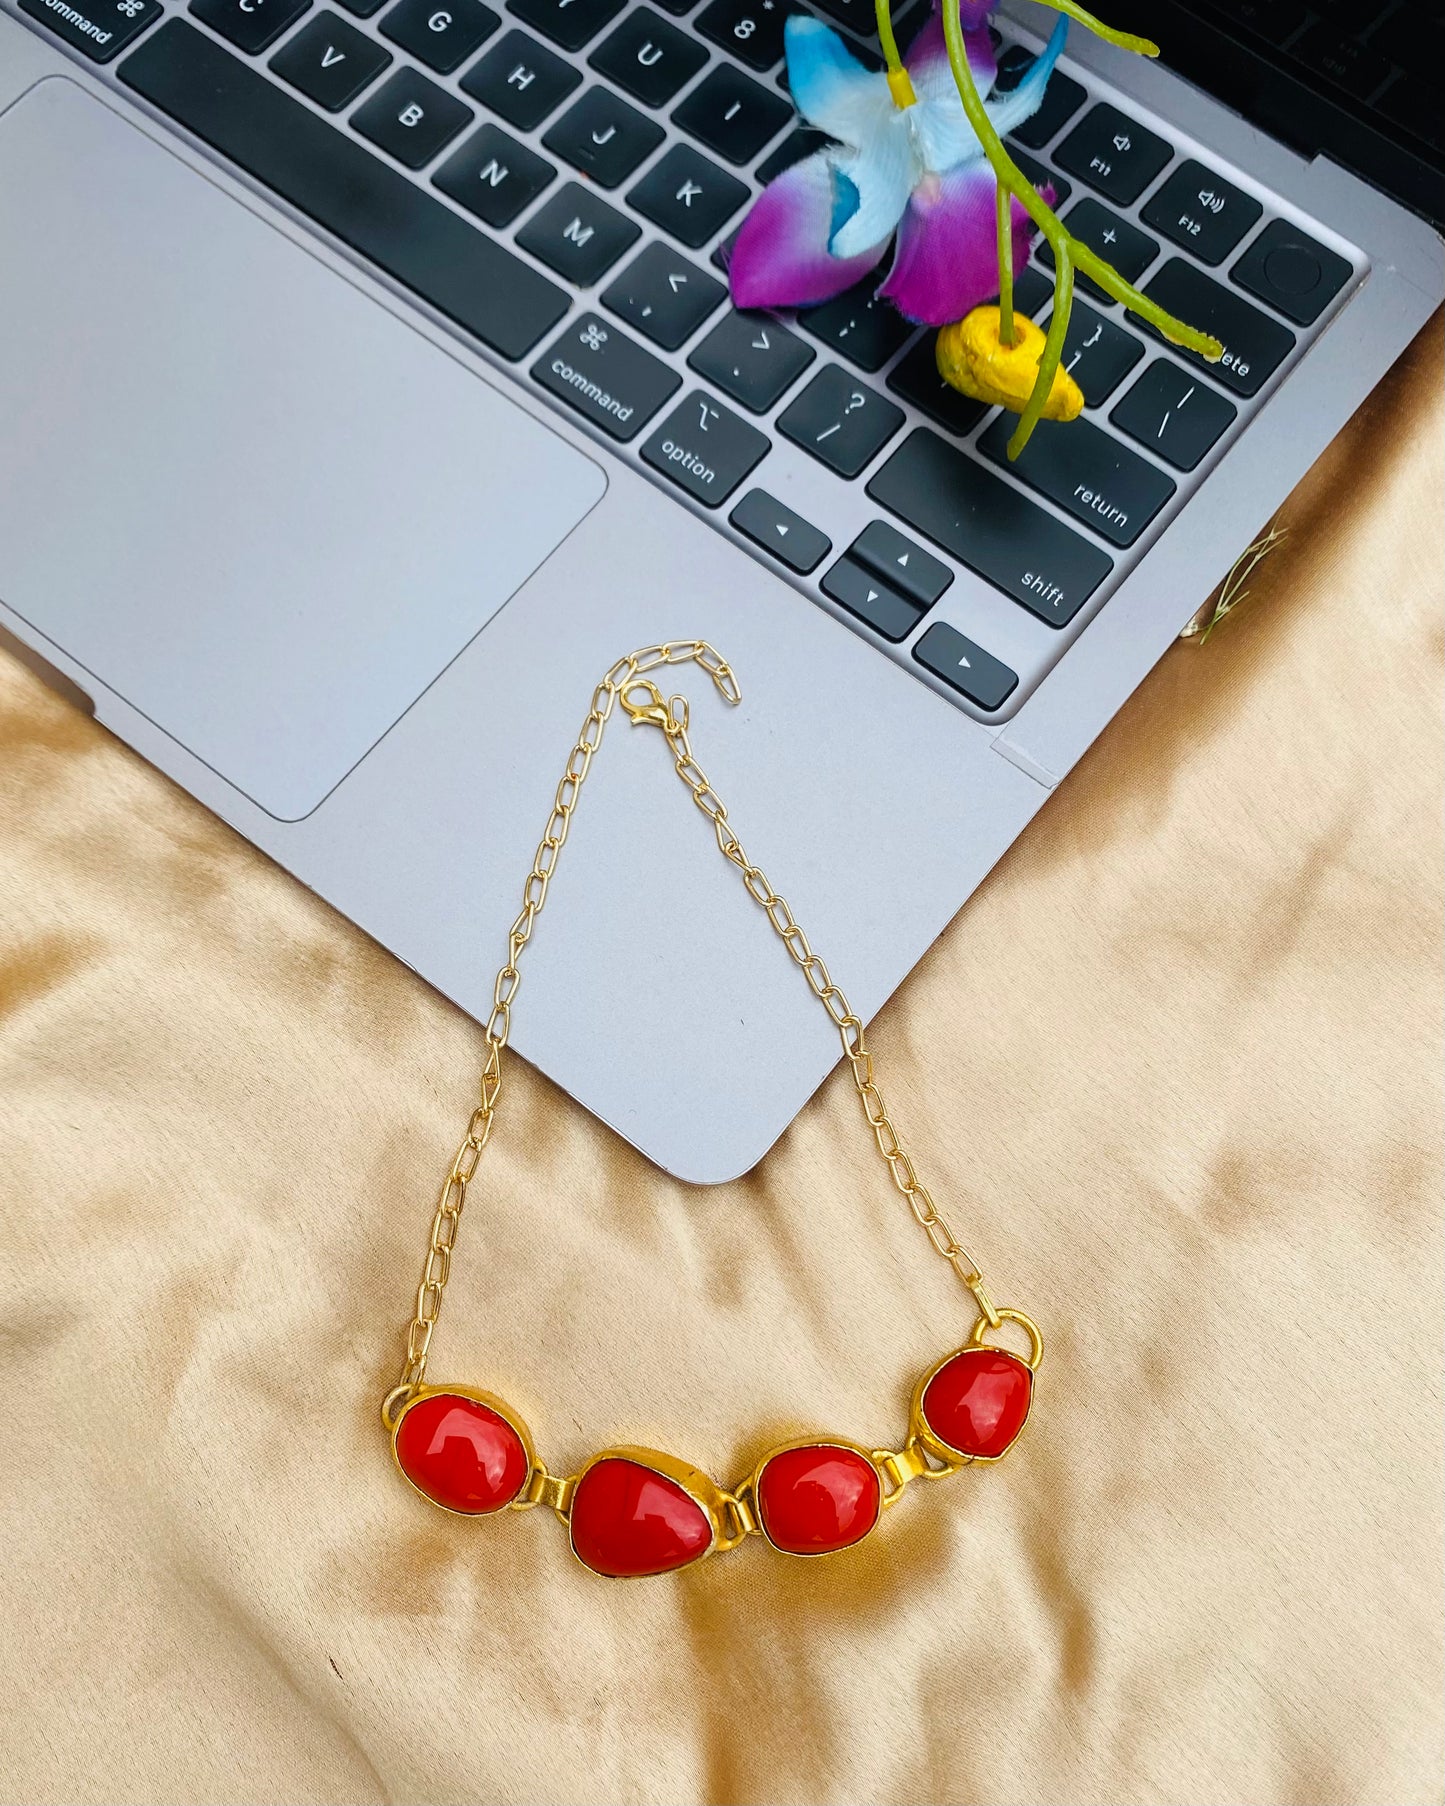 Red Coral Choker